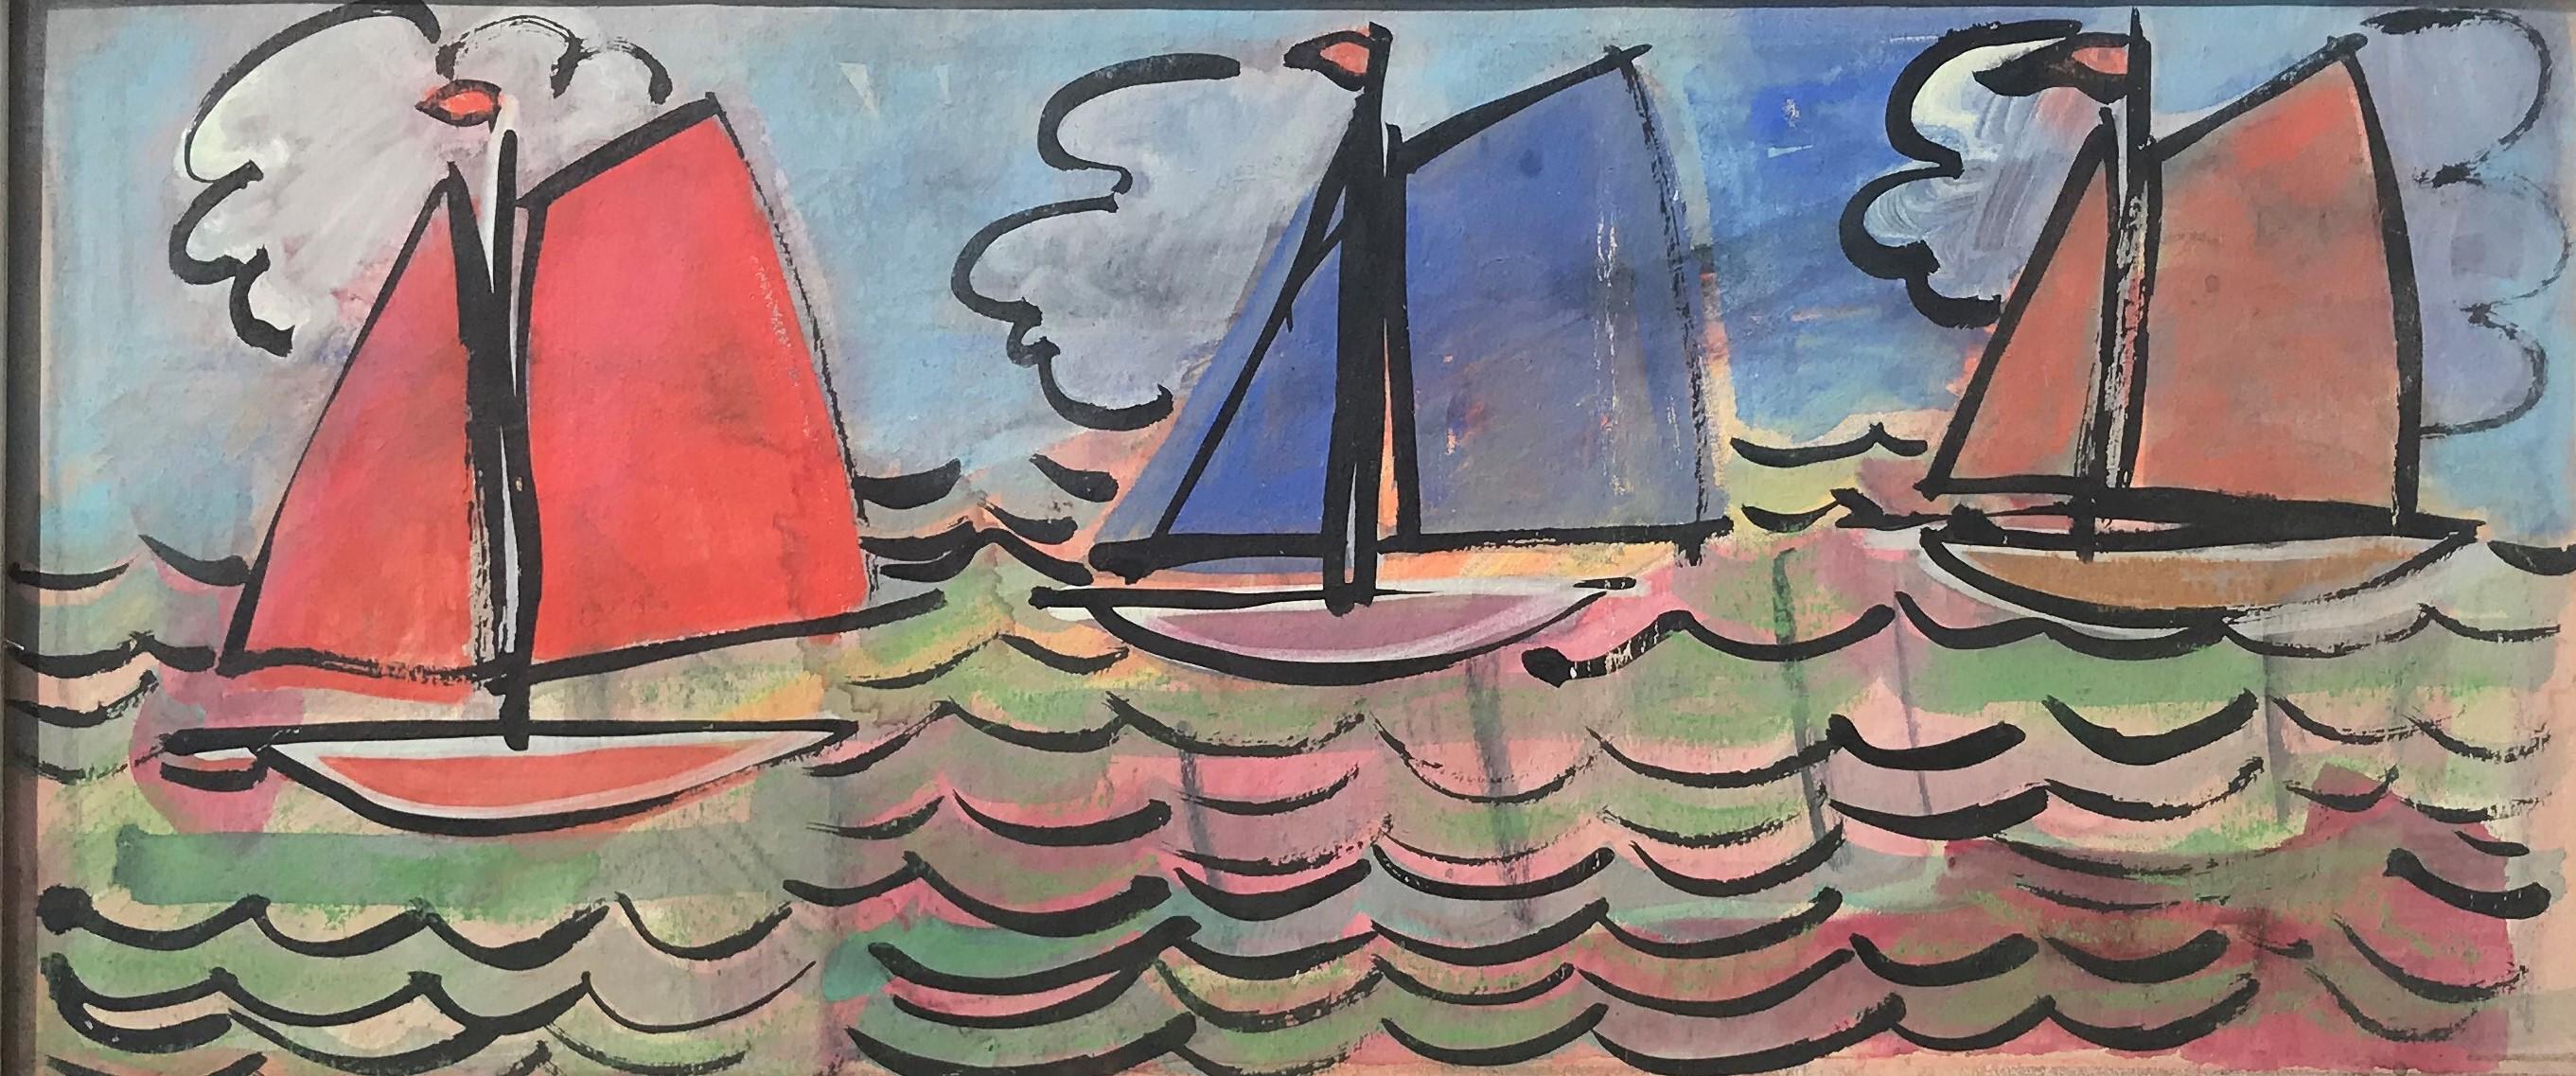 Sailboats at Sea, 20th Century French School, colourful original oil on canvas